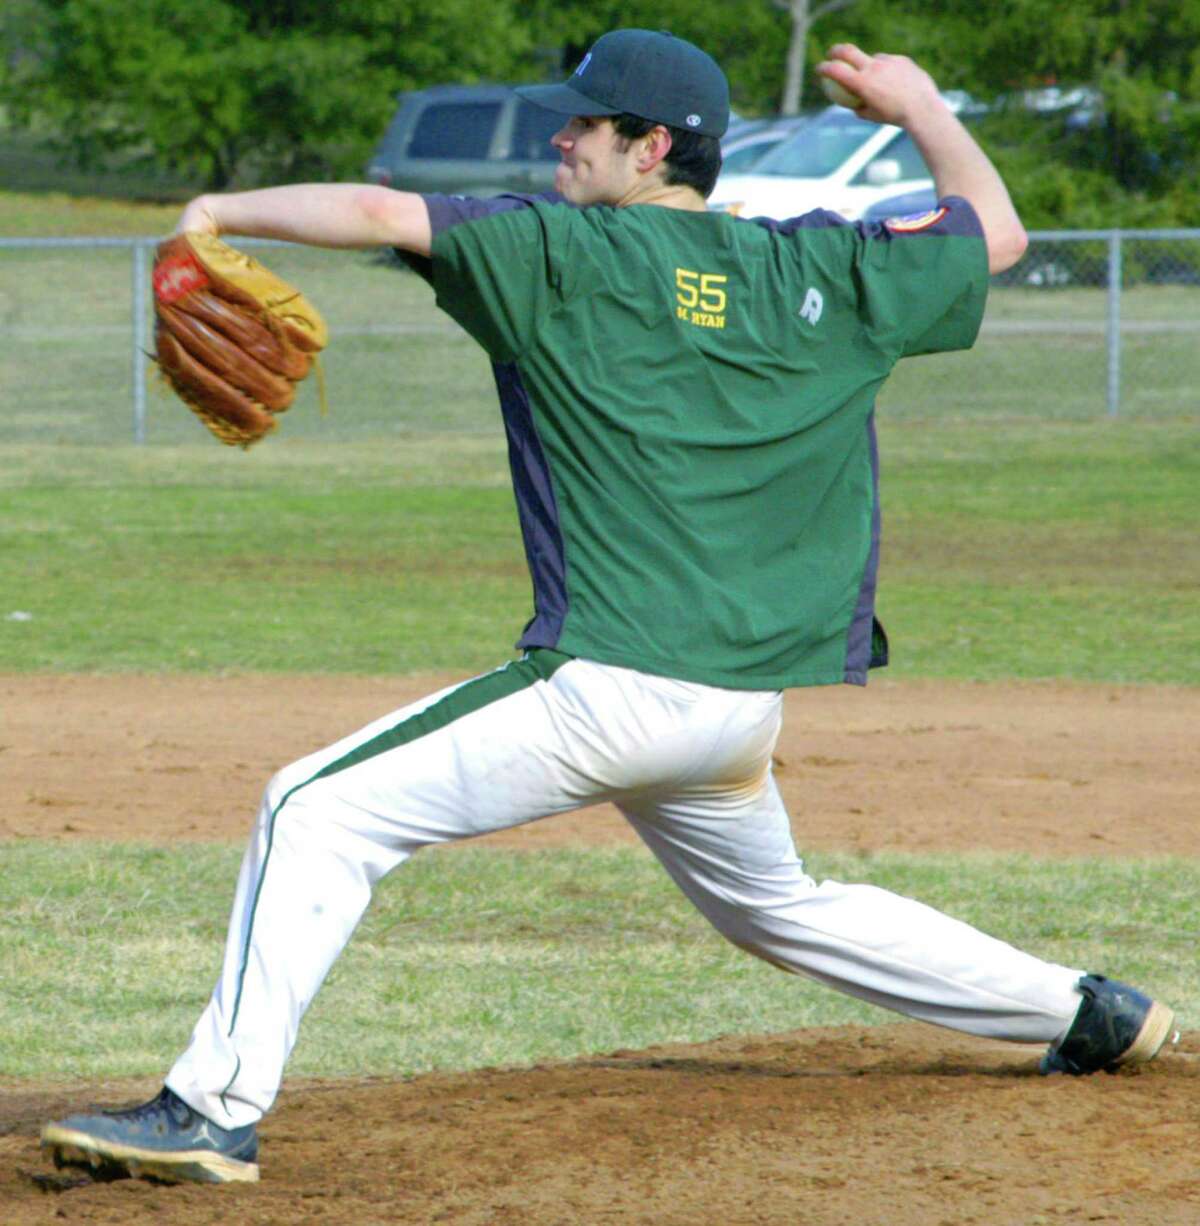 Matt Ryan of the Green Wave delivers a pitch in relief during a pre-season scrimmage for New Milford High School baseball, April 2014